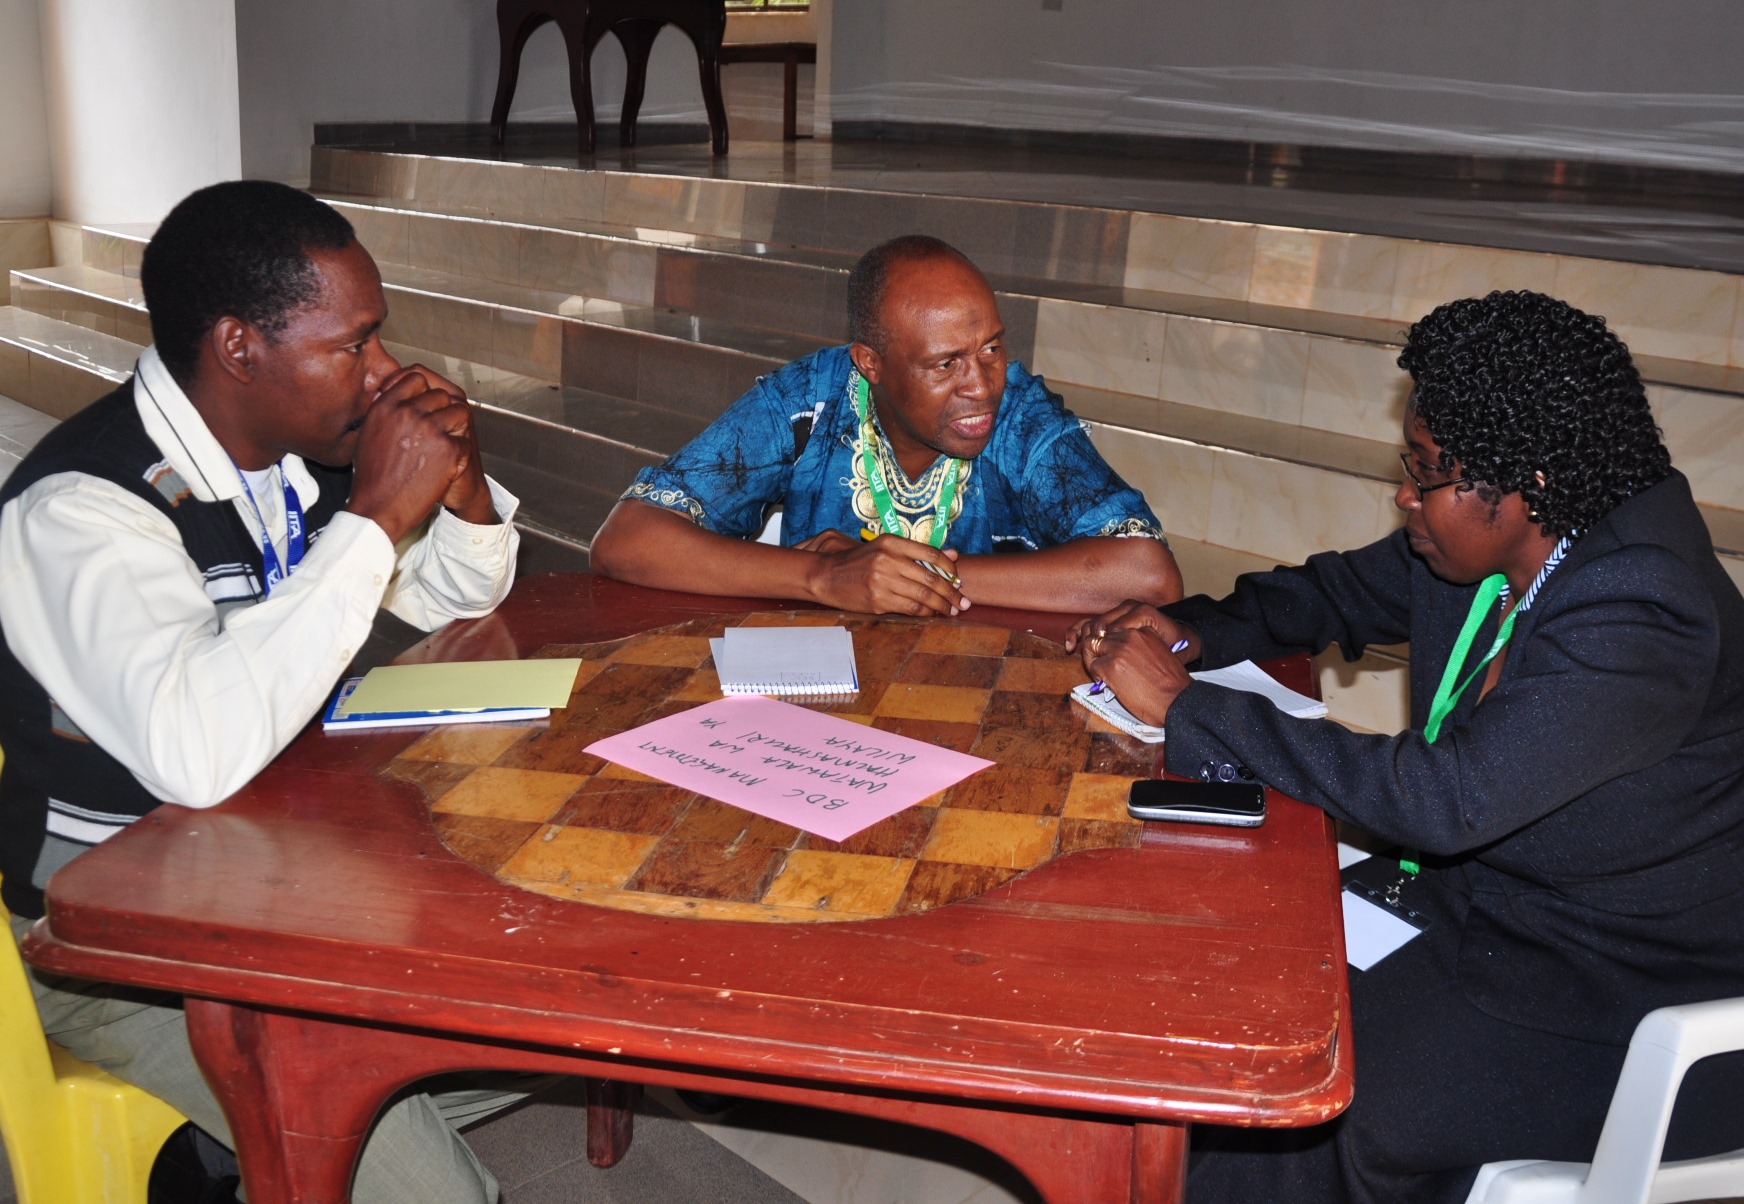 Hassan Lugendo (middle) and other representatives of the Babati District Management discussing issues of concern that they will tackle through the platform